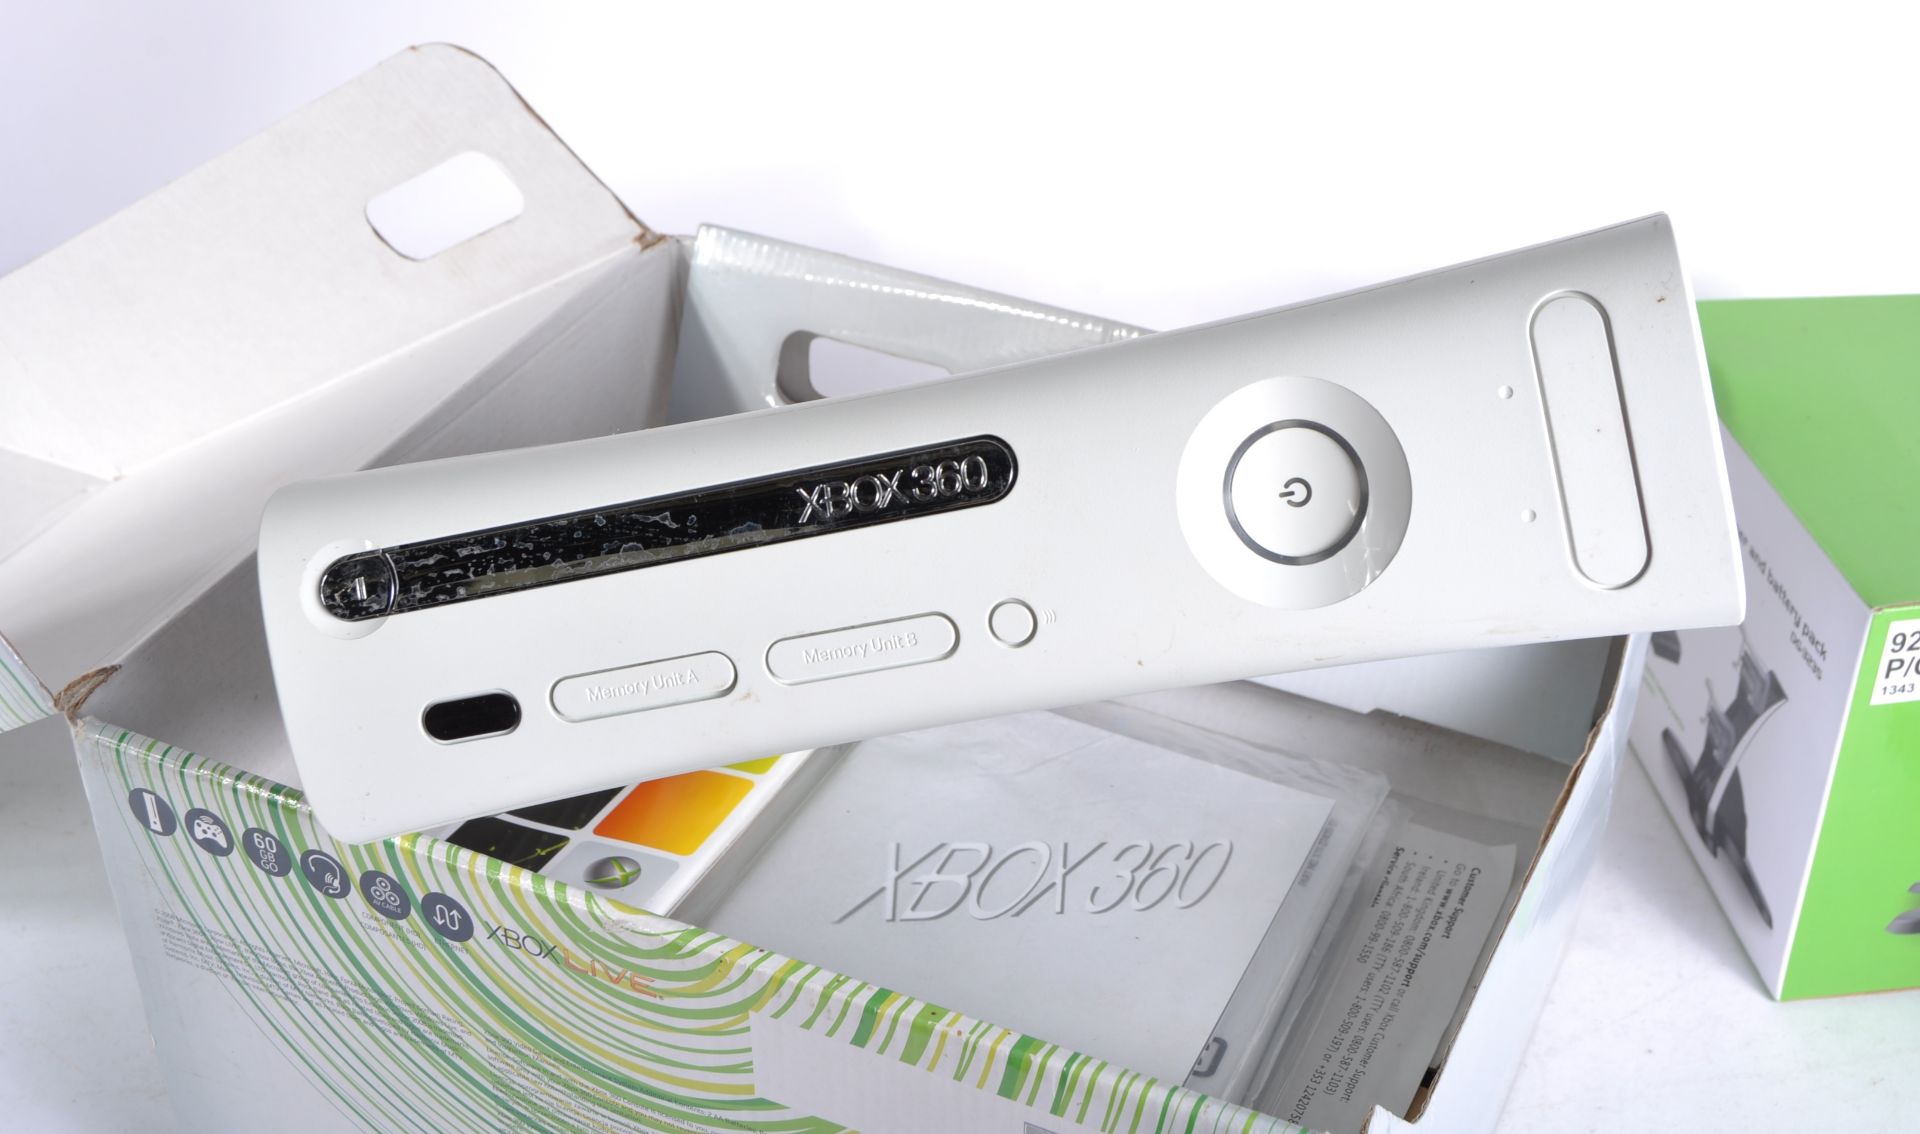 RETRO GAMING - MICROSOFT XBOX 360 VIDEO GAMES CONSOLE, GAMES & ACCESSORIES - Image 5 of 5